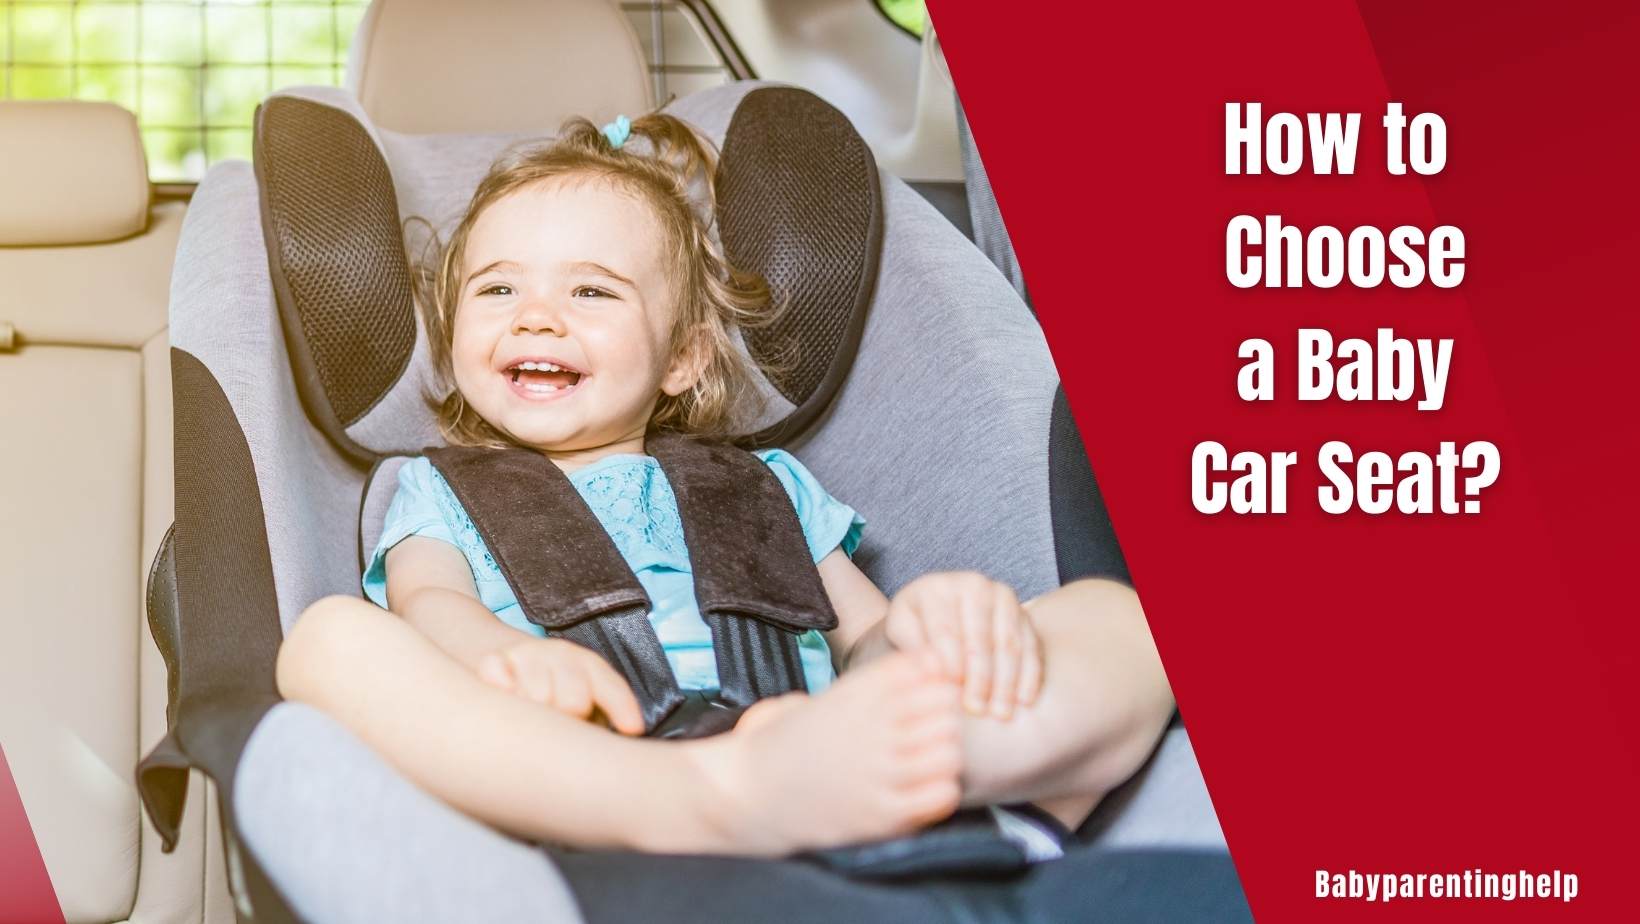 How to Choose a Baby Car Seat